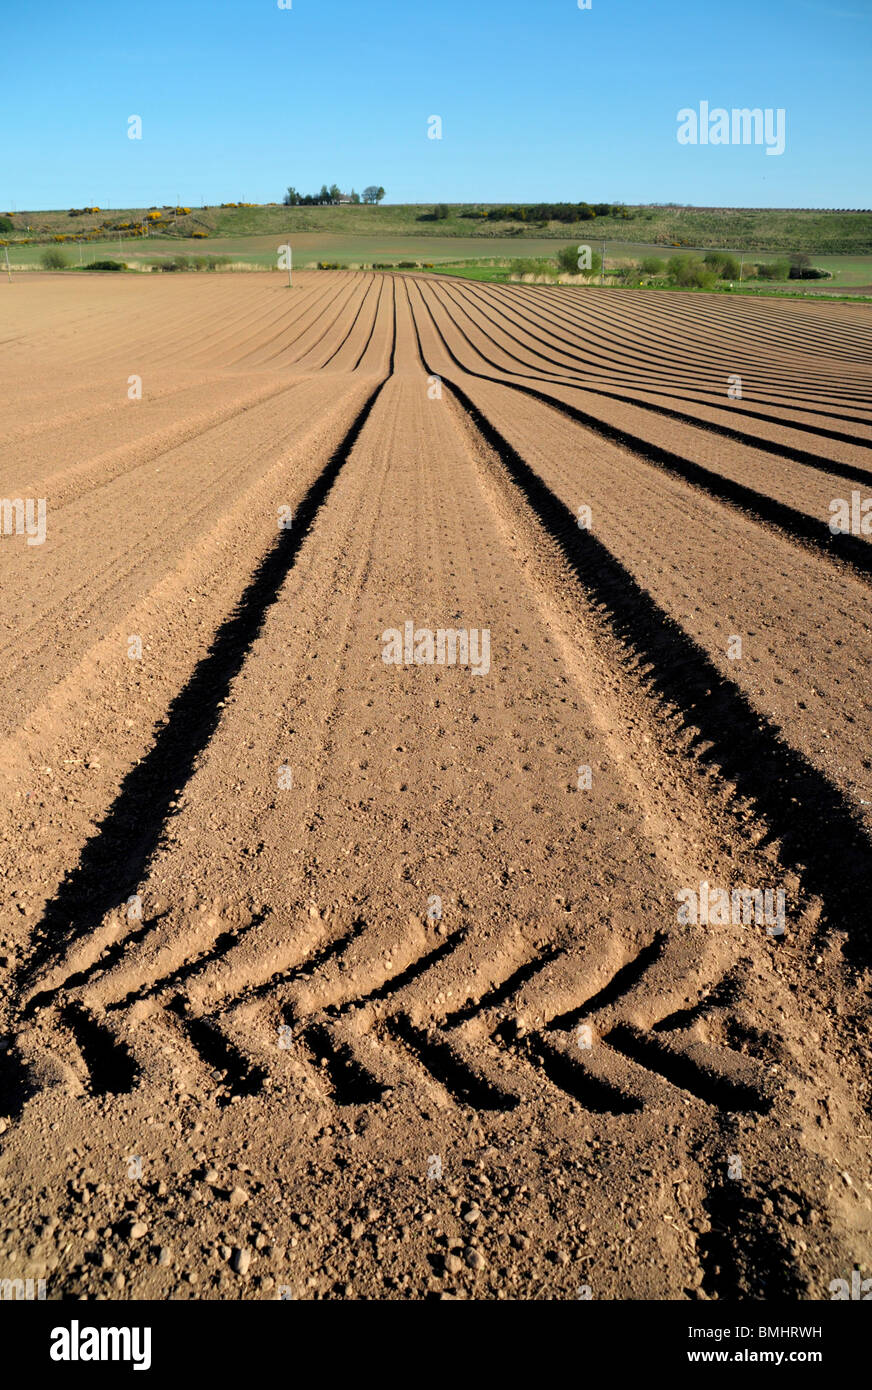 Fields of ploughed and drilled planted soil furrows with tractor tyre tread marks in the foreground. Stock Photo